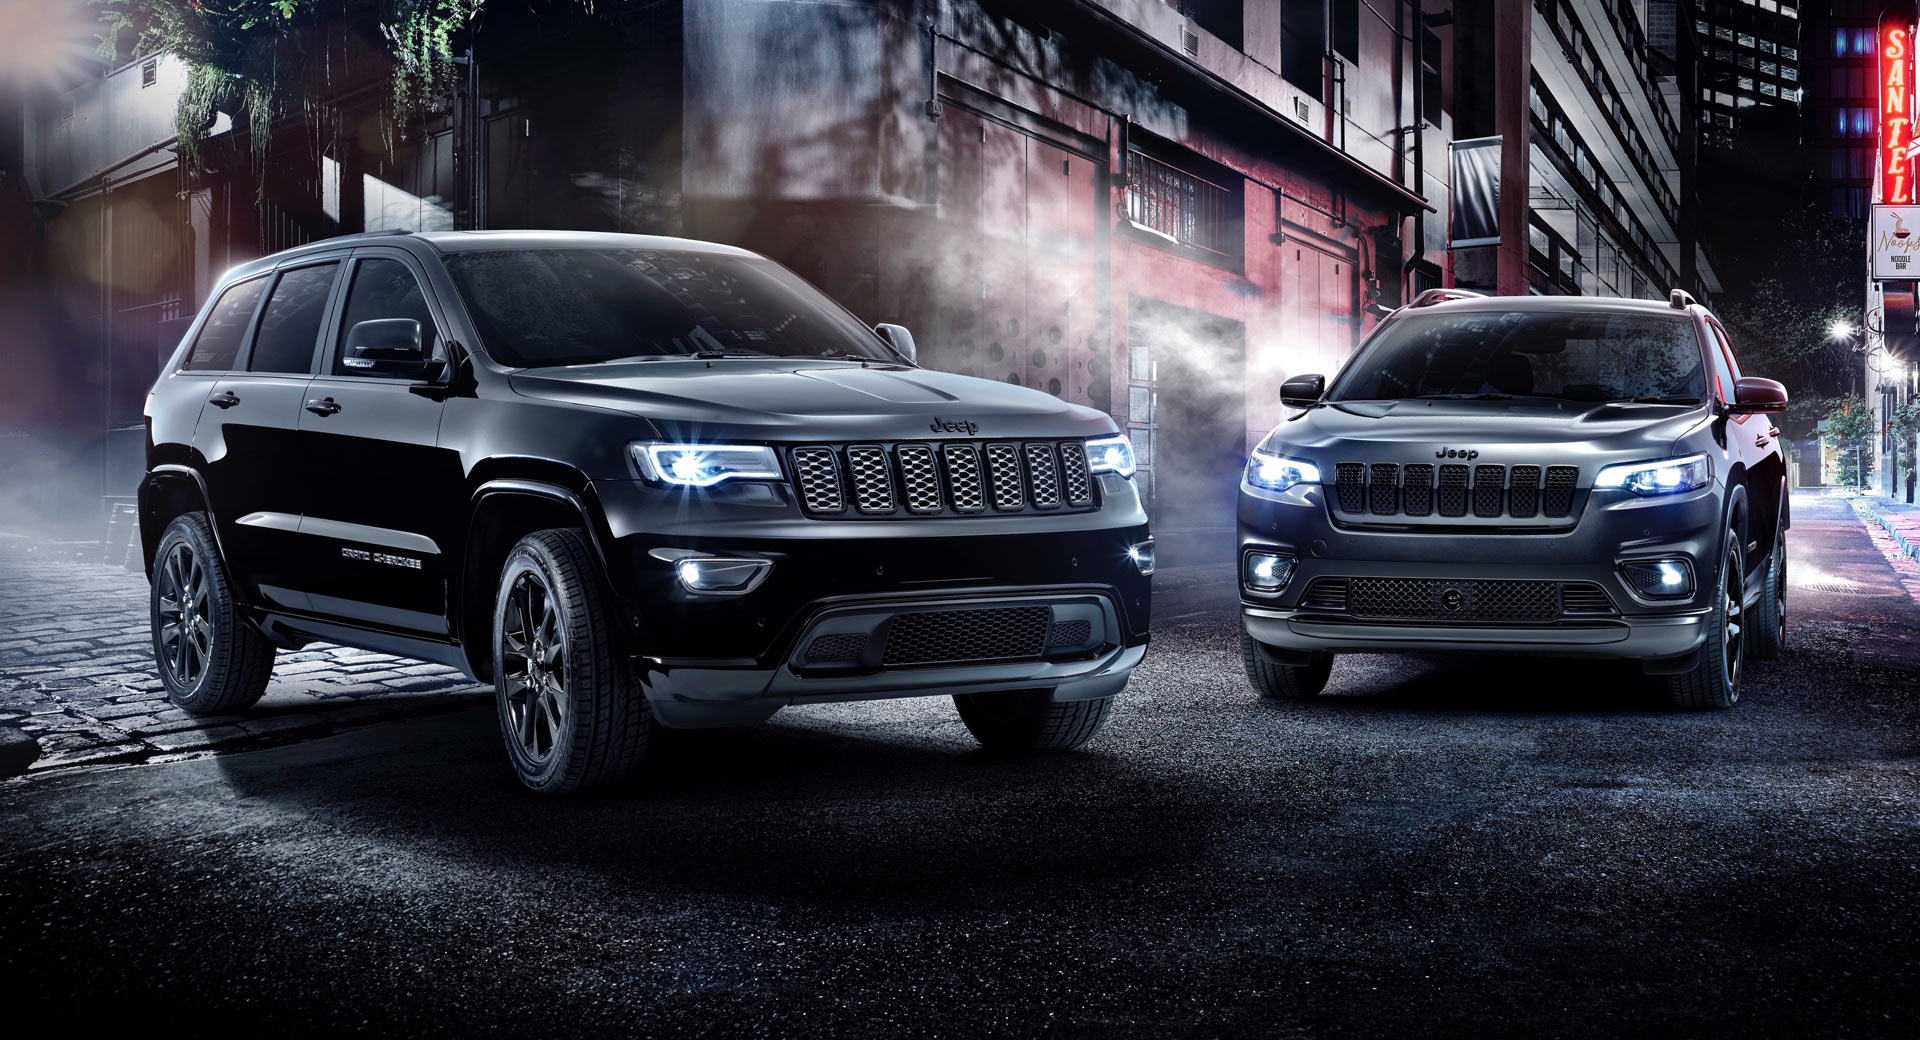 Jeep Grand Cherokee And Cherokee Join The Dark Side With ...